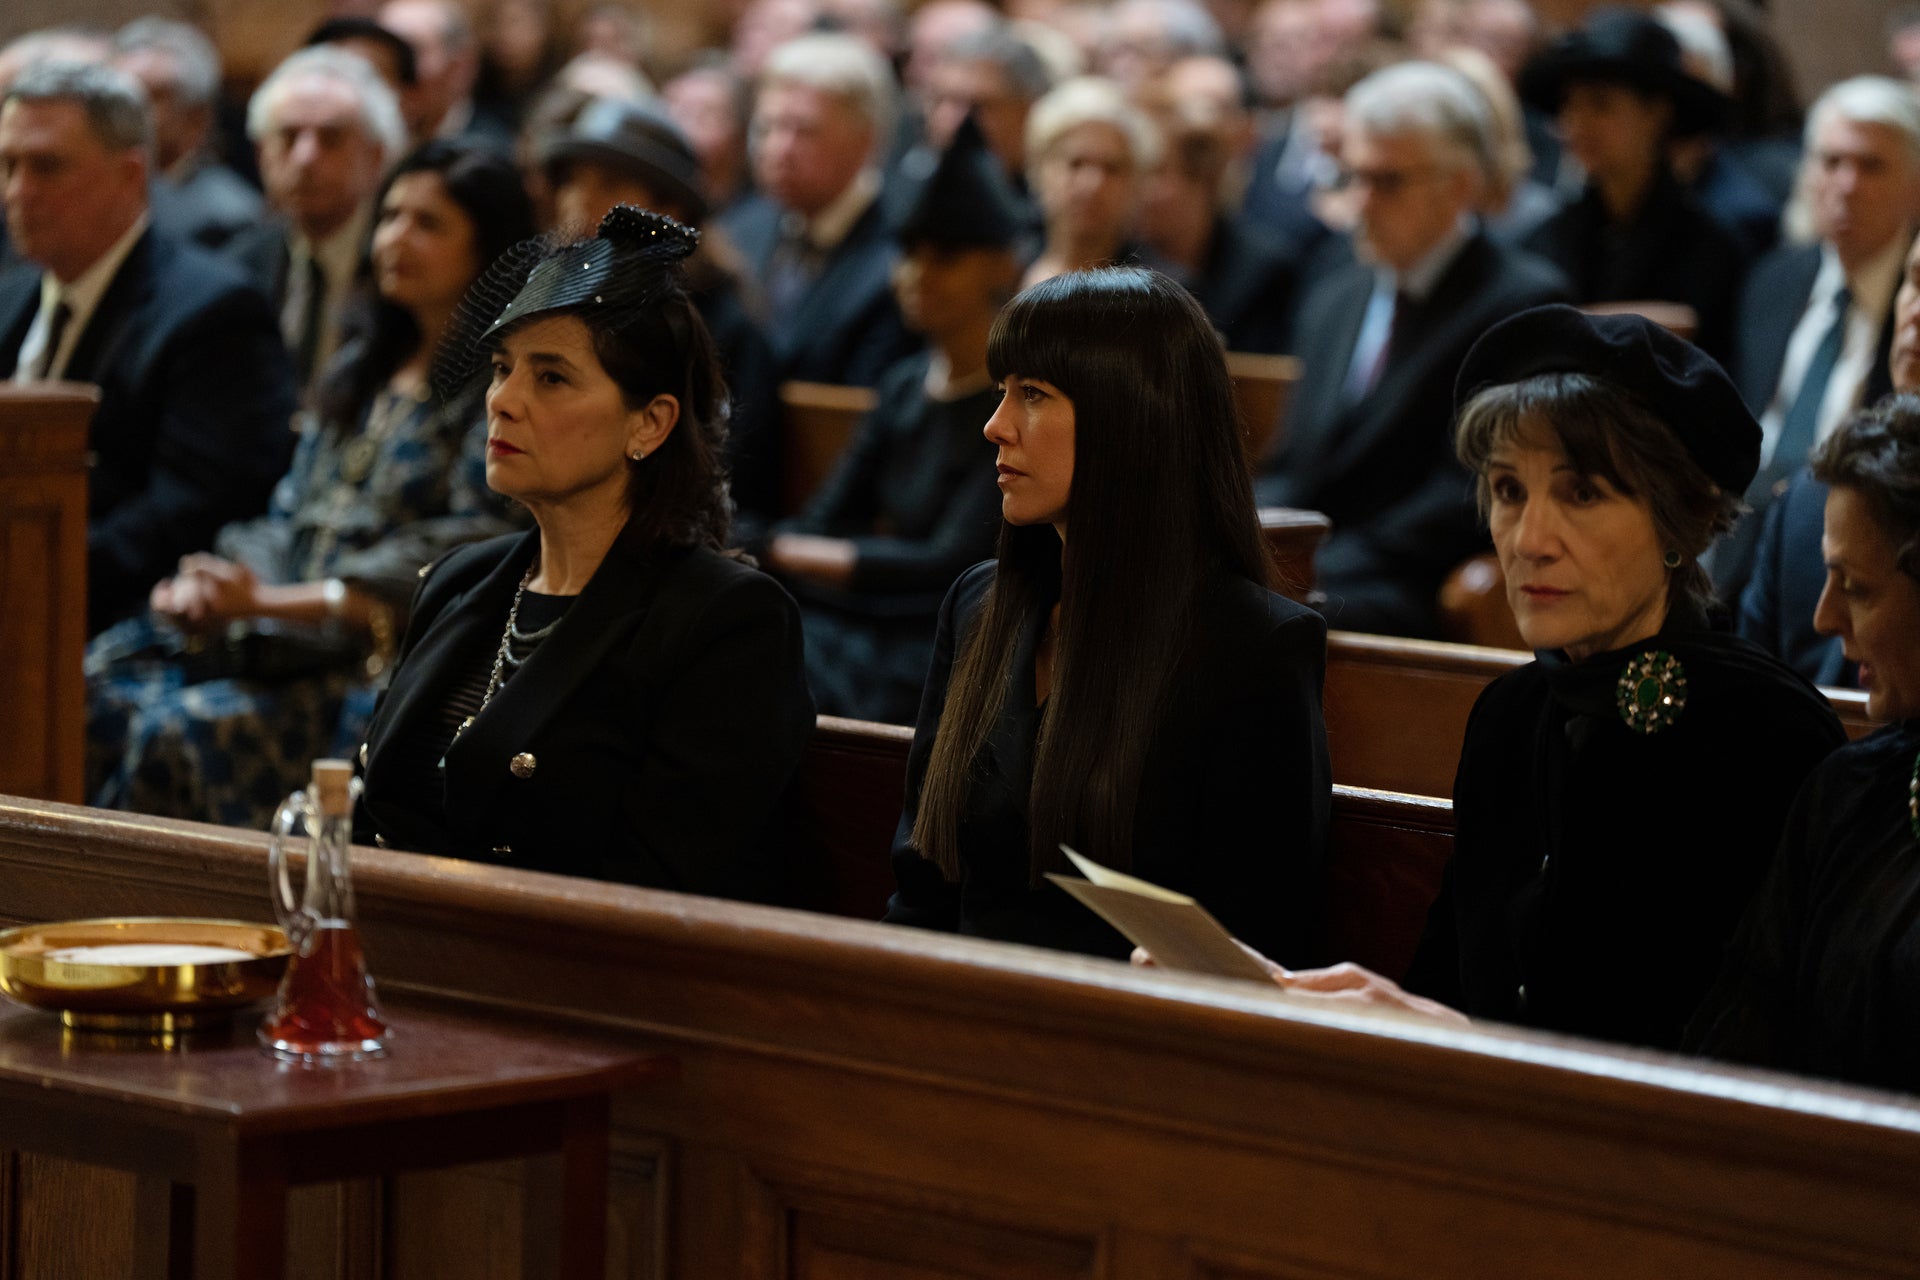 Marcia, Kerry, and Caroline sitting in a pew at Logan's funeral.